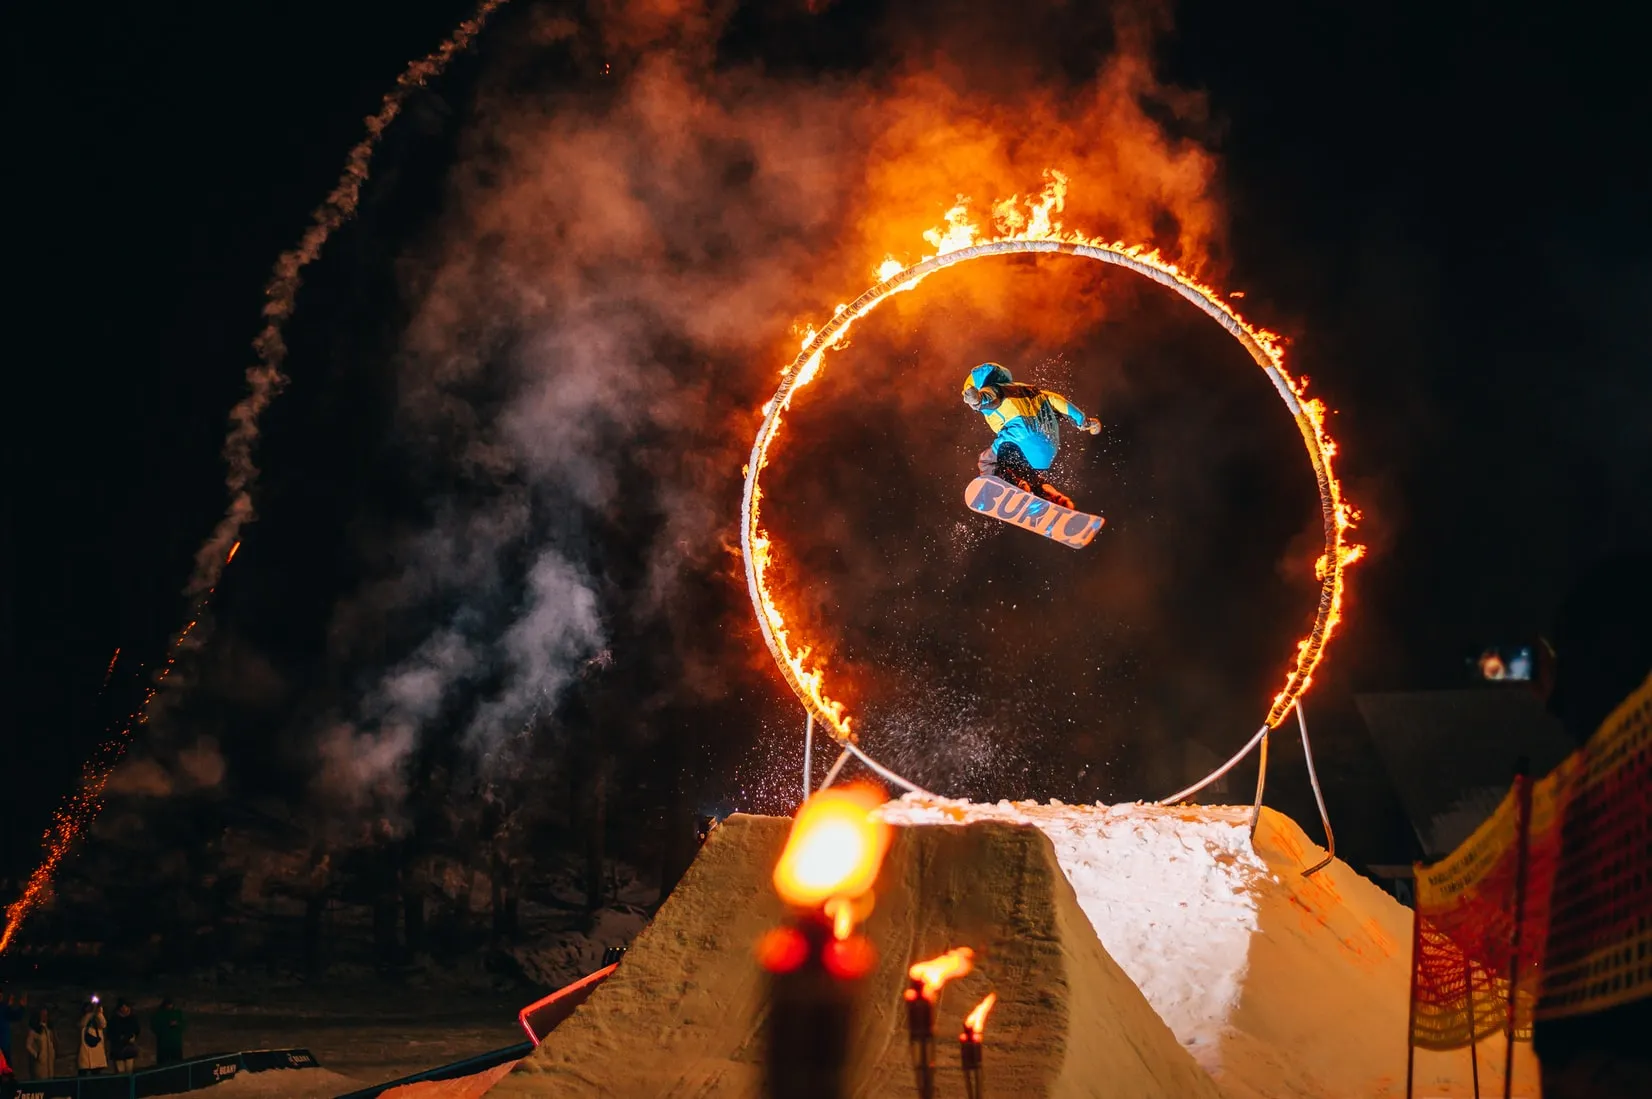 Culture Places to Visit - travelers watch a fire show in which a snowboarder jumps into a ring of fire